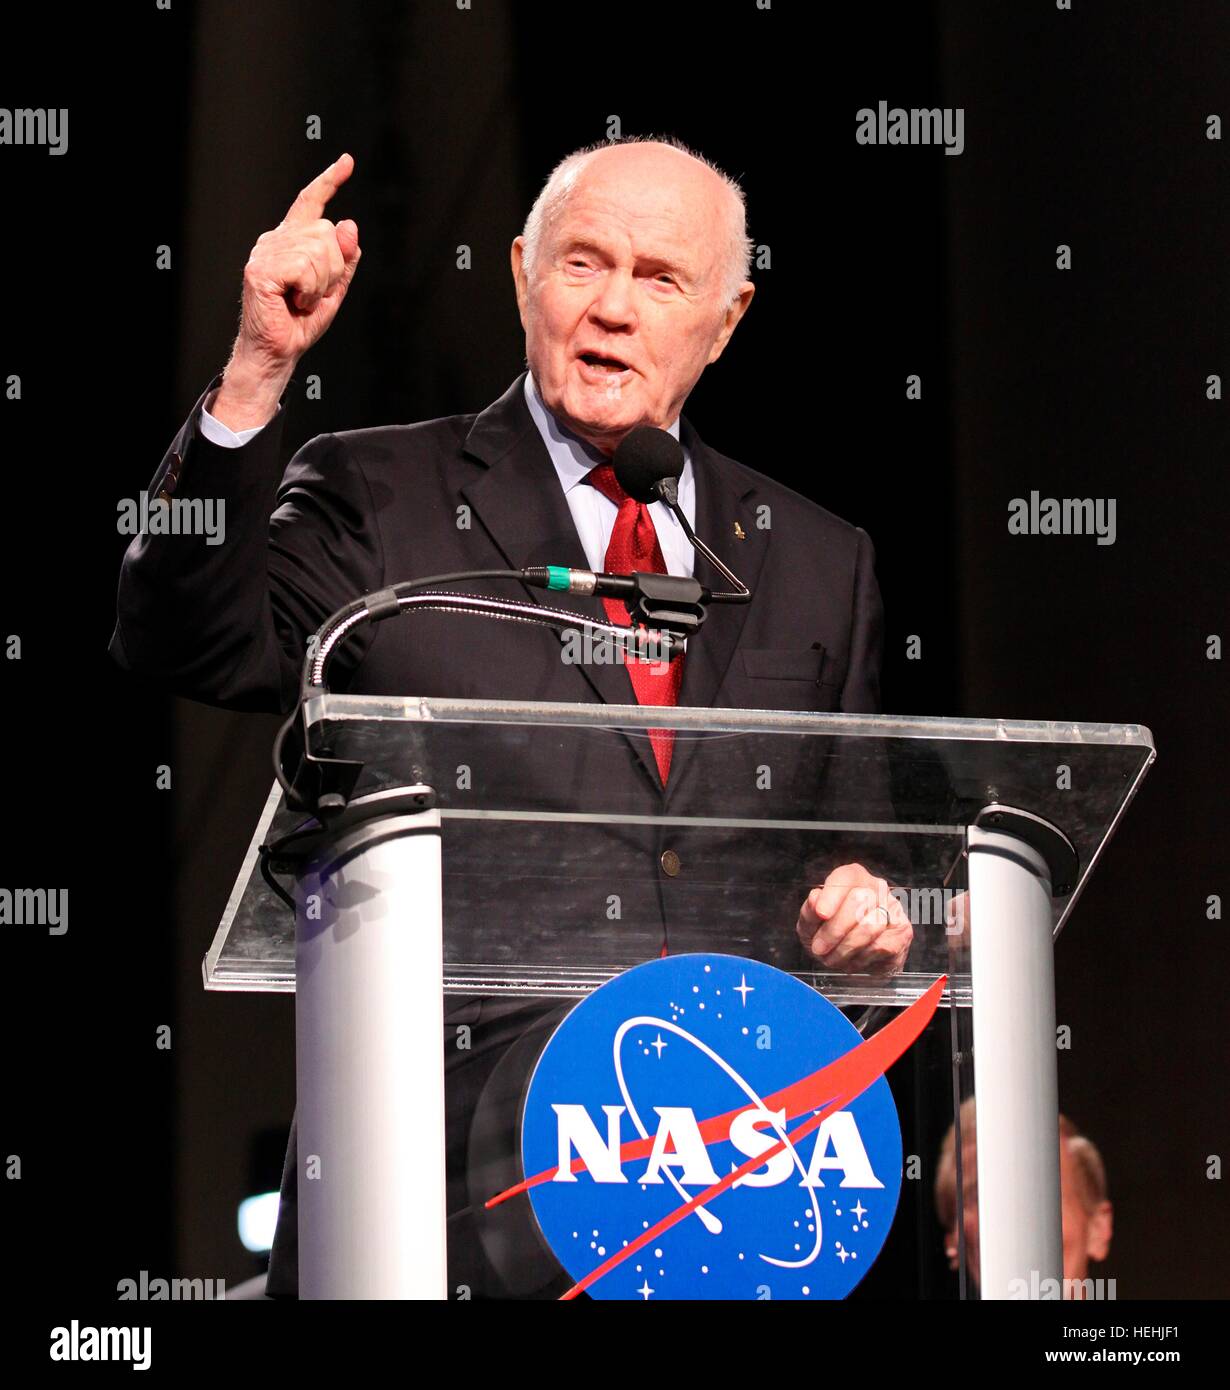 NASA Mercury astronaut John Glenn speaks during the On Shoulders of Giants program at the Kennedy Space Center Visitor Complex Rocket Garden February 17, 2012 in Titusville, Florida. The event celebrates 50 years of Americans in space orbit which began with Glenns MA-6 mission in 1962. Stock Photo